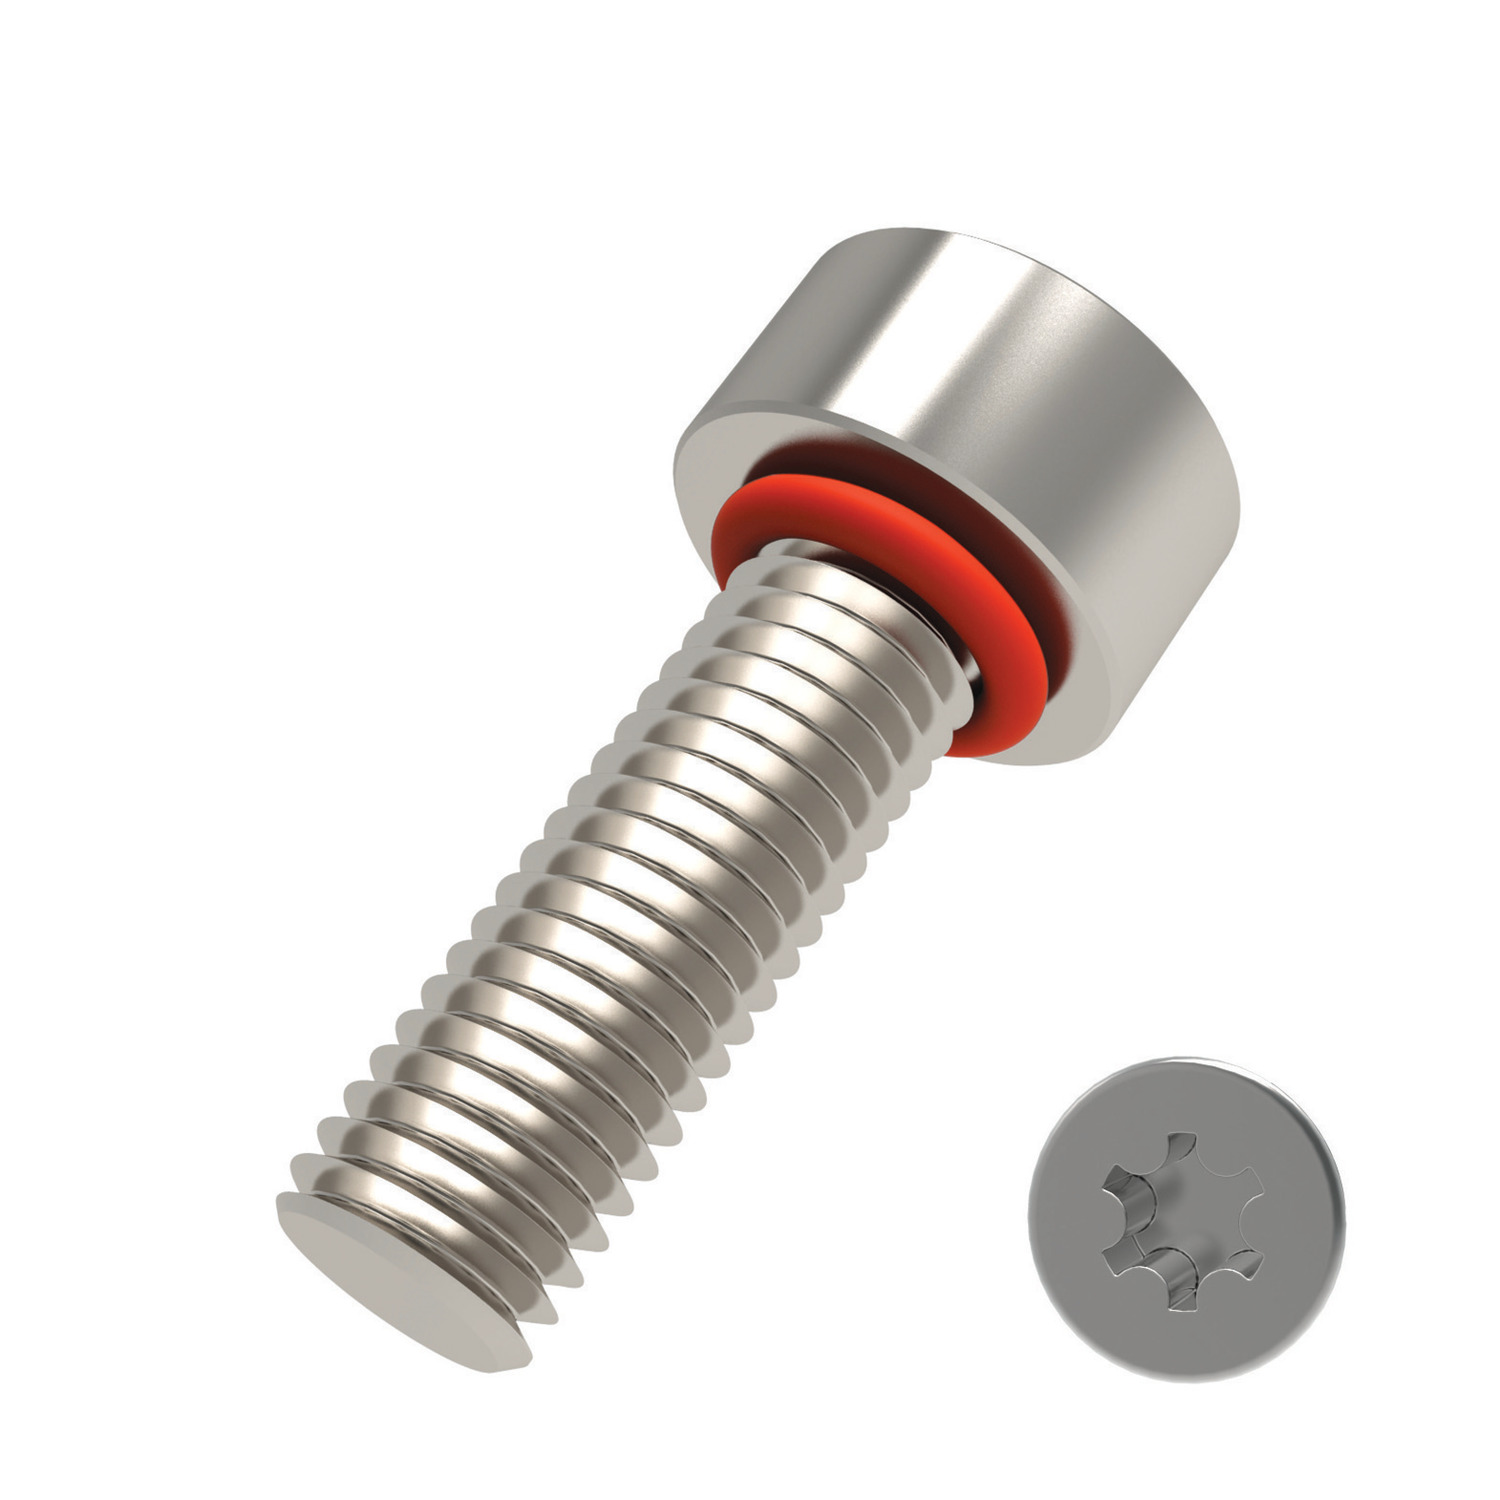 Cap Head Seal Screws Self-sealing screws, socket cap head with integral O ring groove to seal liquids and gases out and in. M2 to M16 A2 or A4 stainless steel.